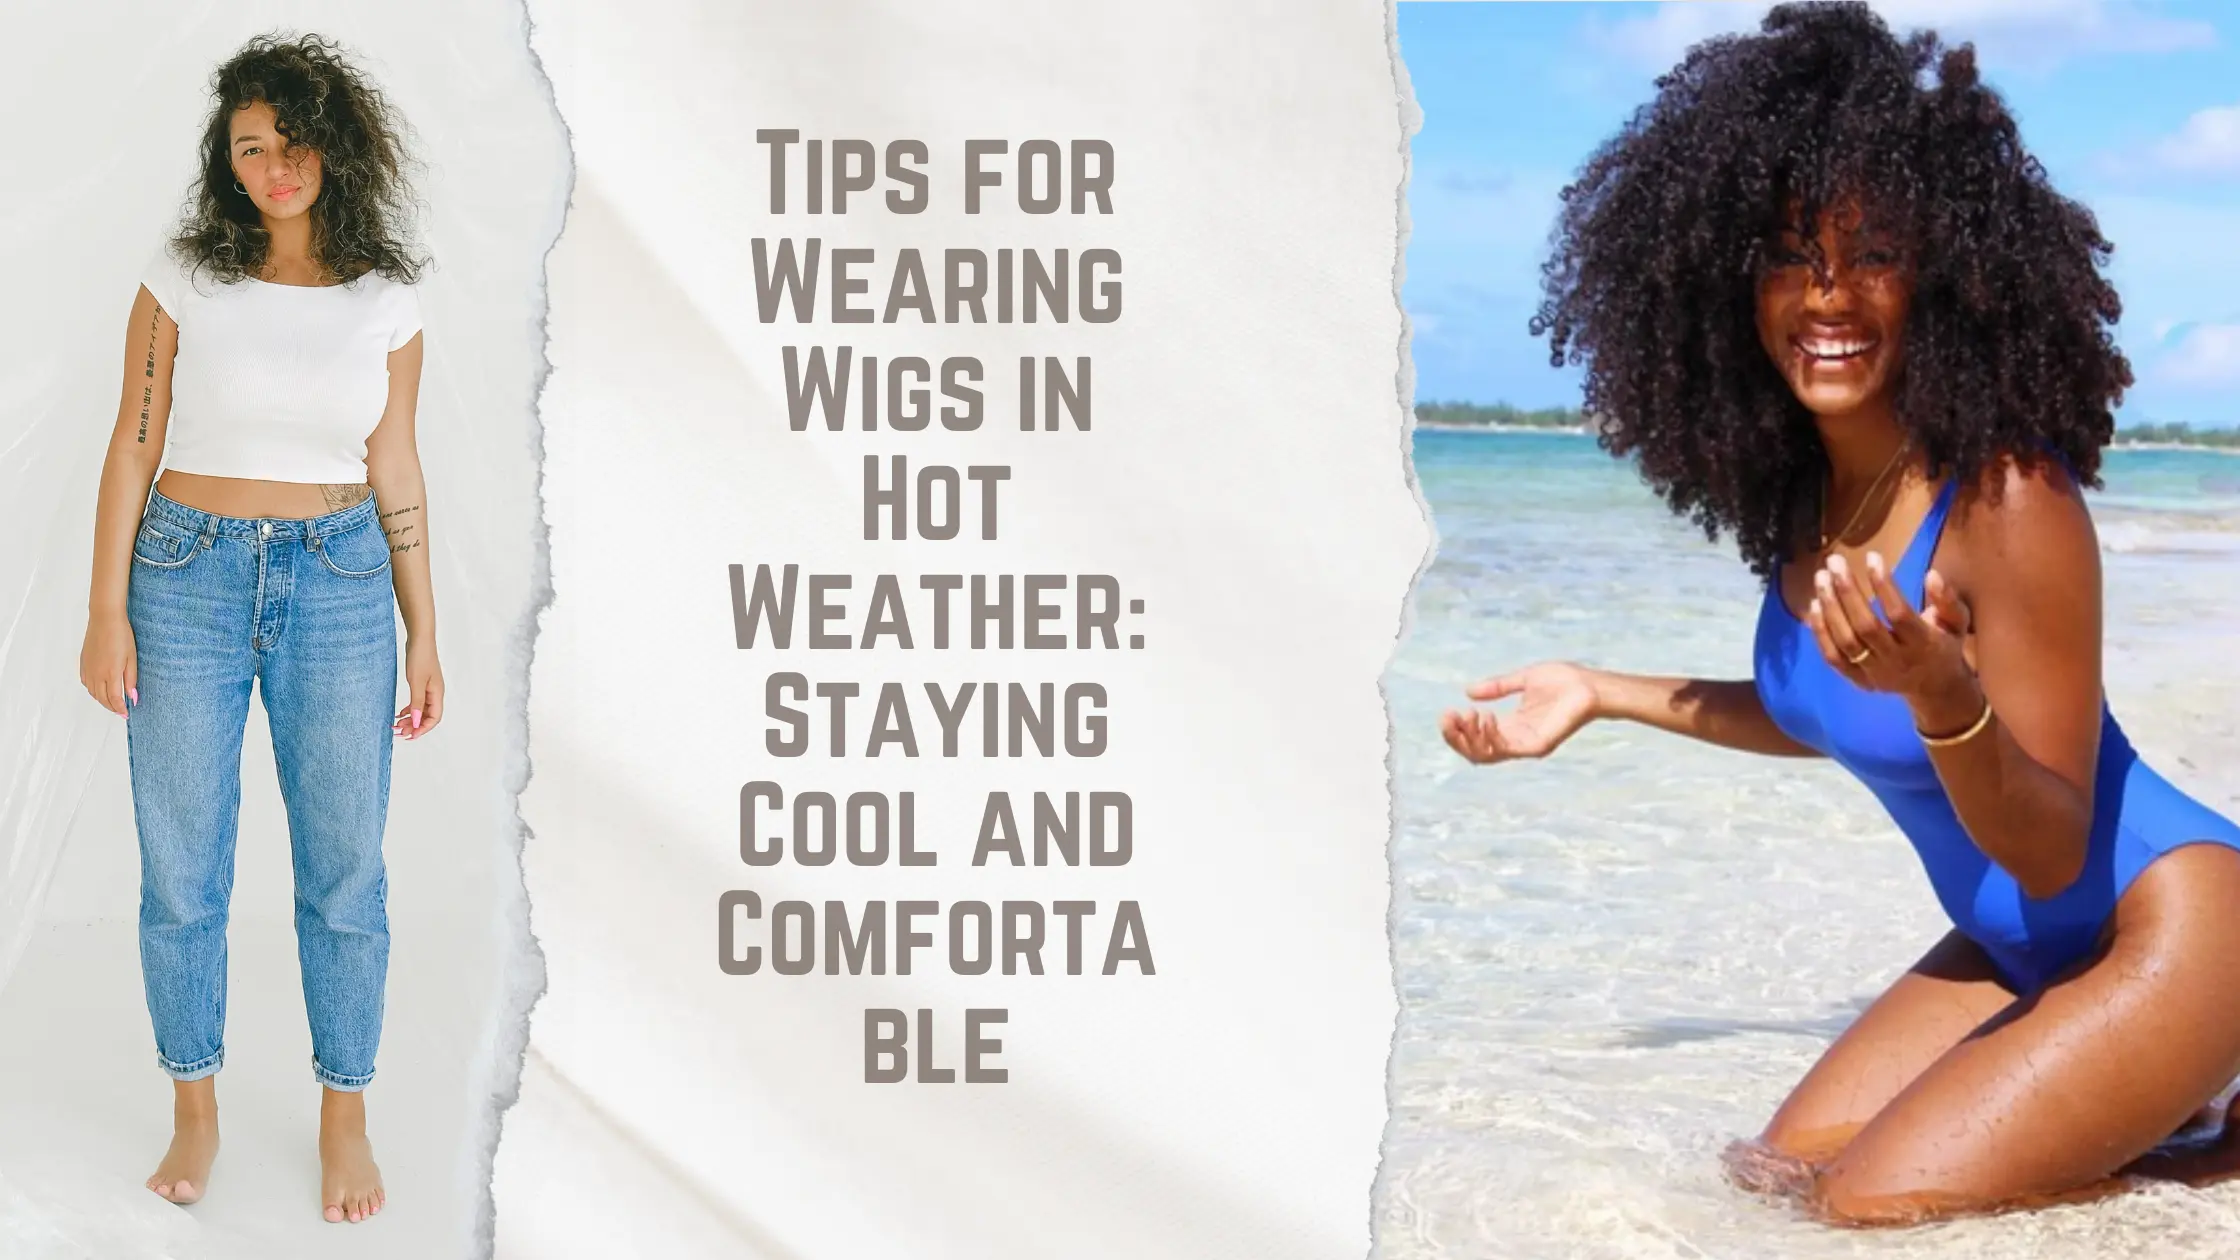  Tips for Wearing Wigs in Hot Weather: Staying Cool and Comfortable